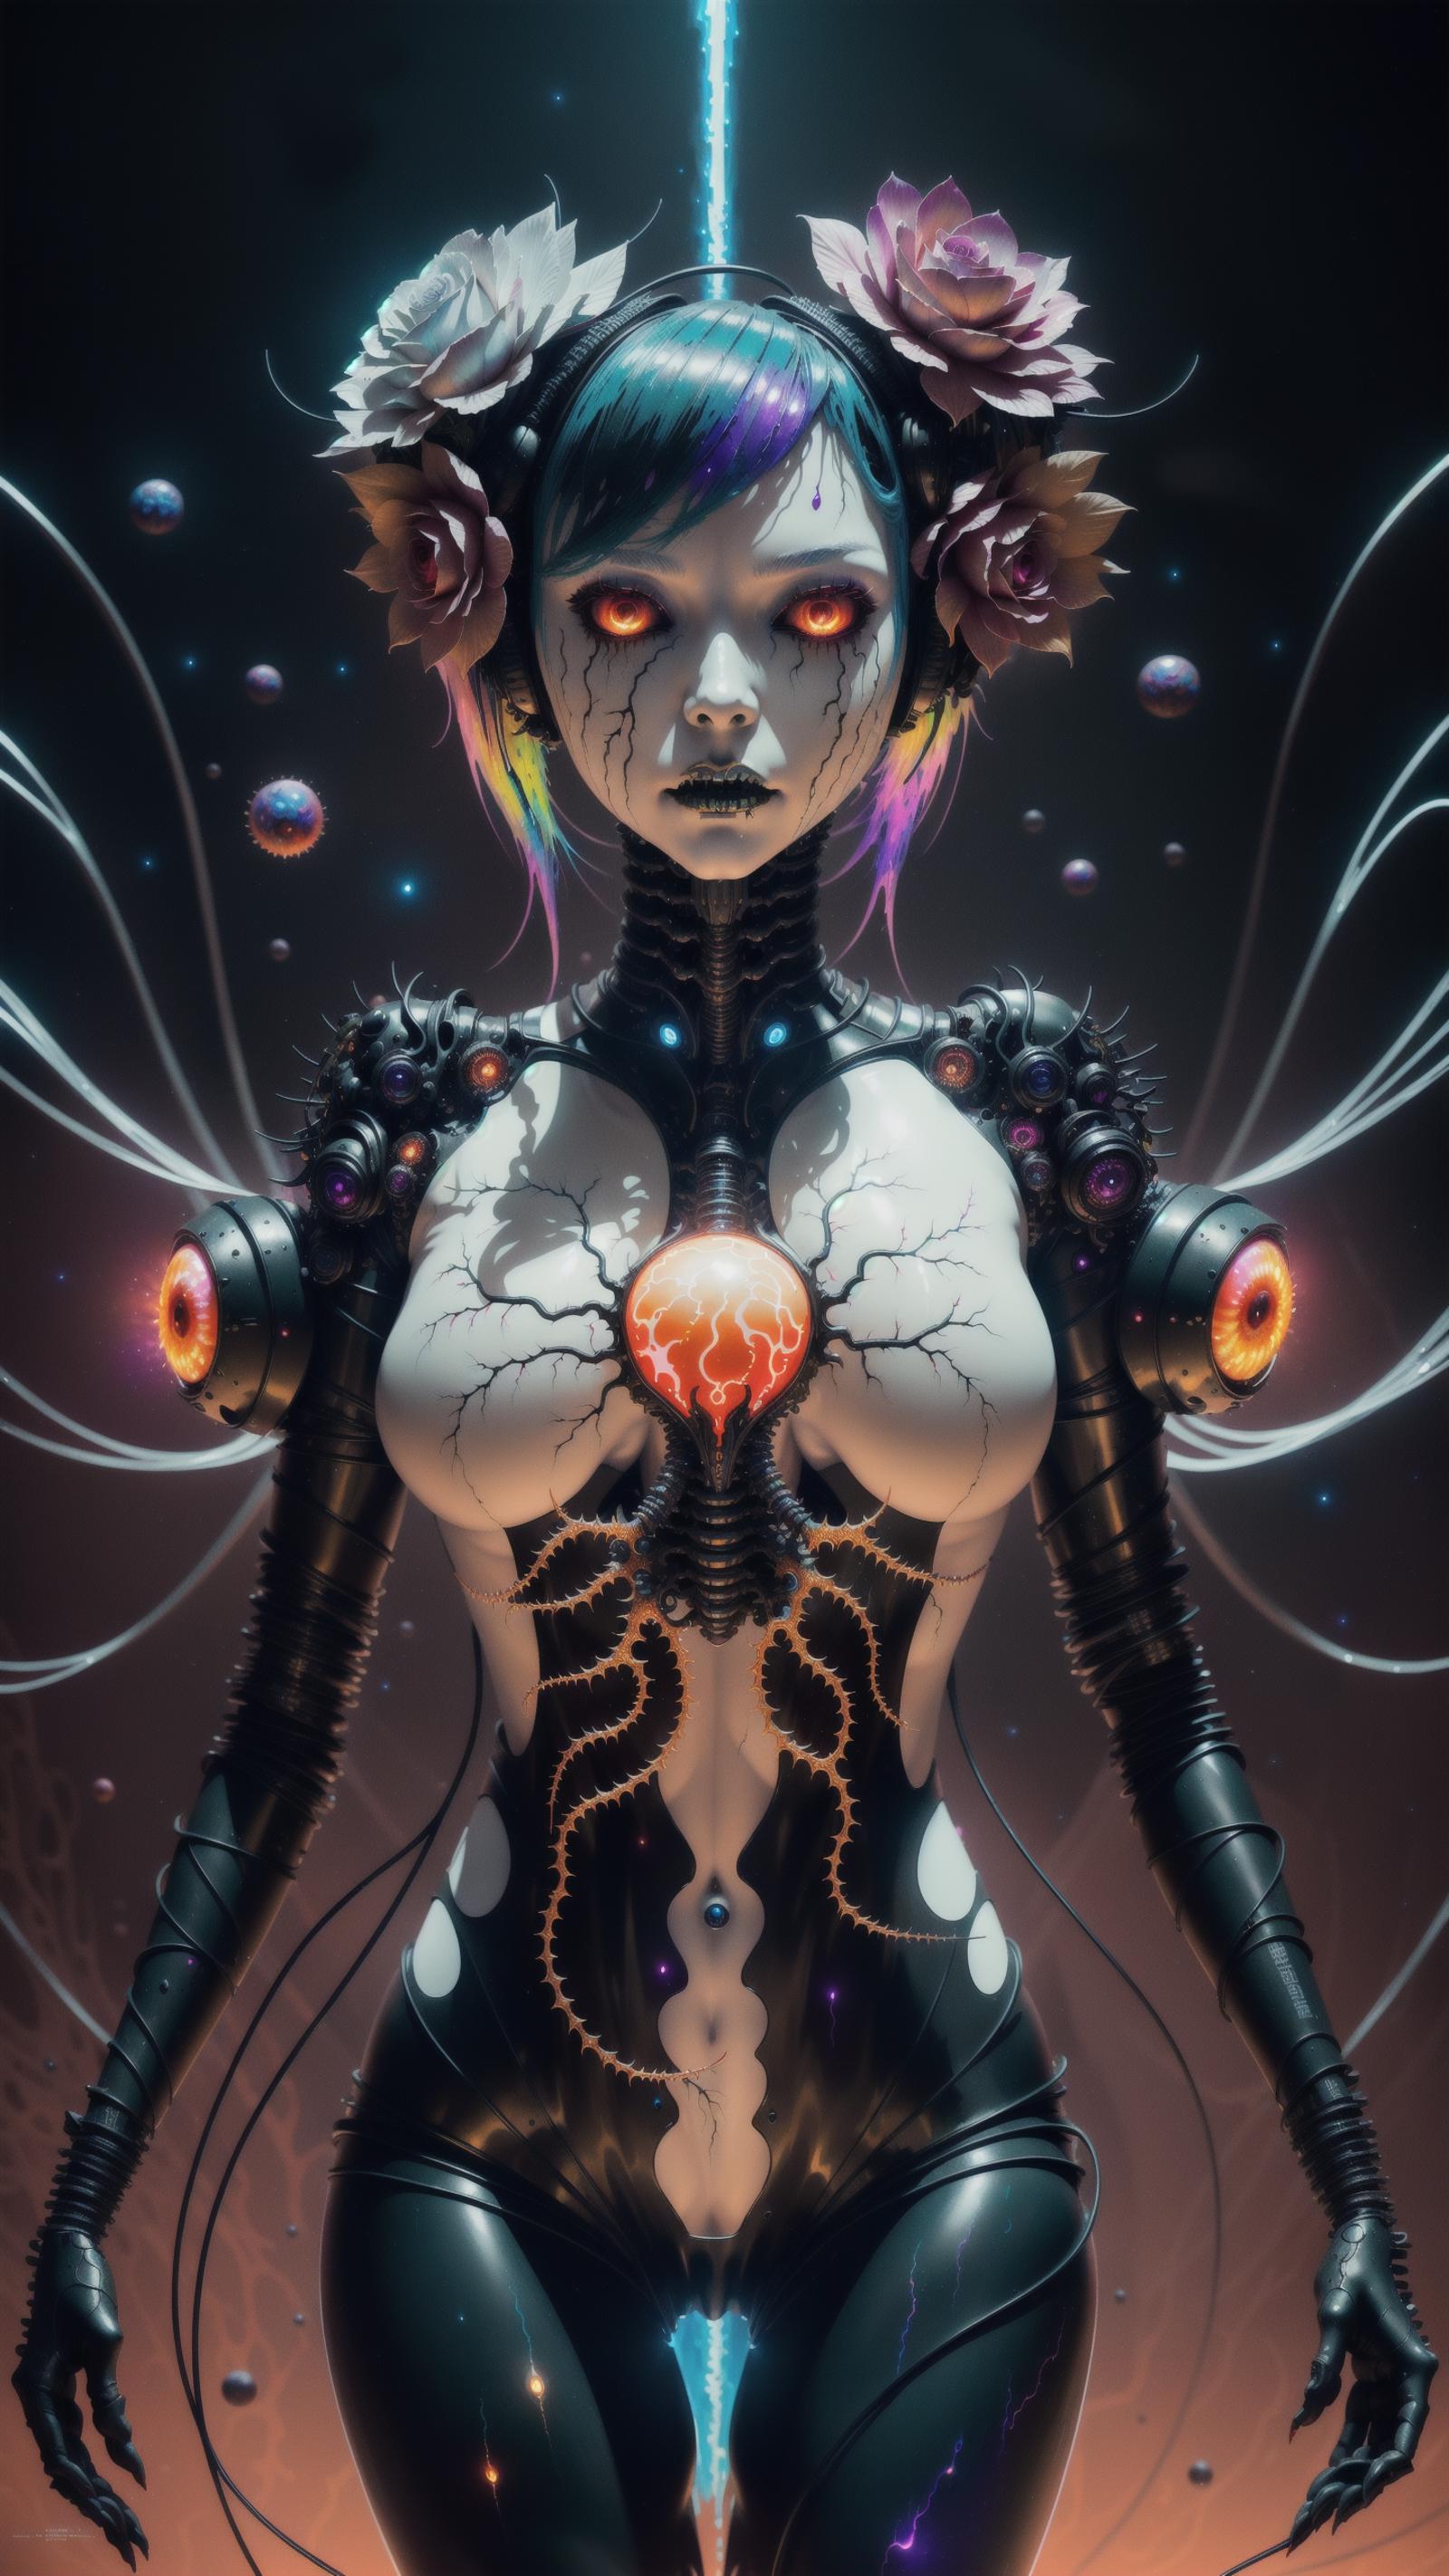 Anime robot woman with a heart-shaped tattoo on her chest, surrounded by glowing orbs.